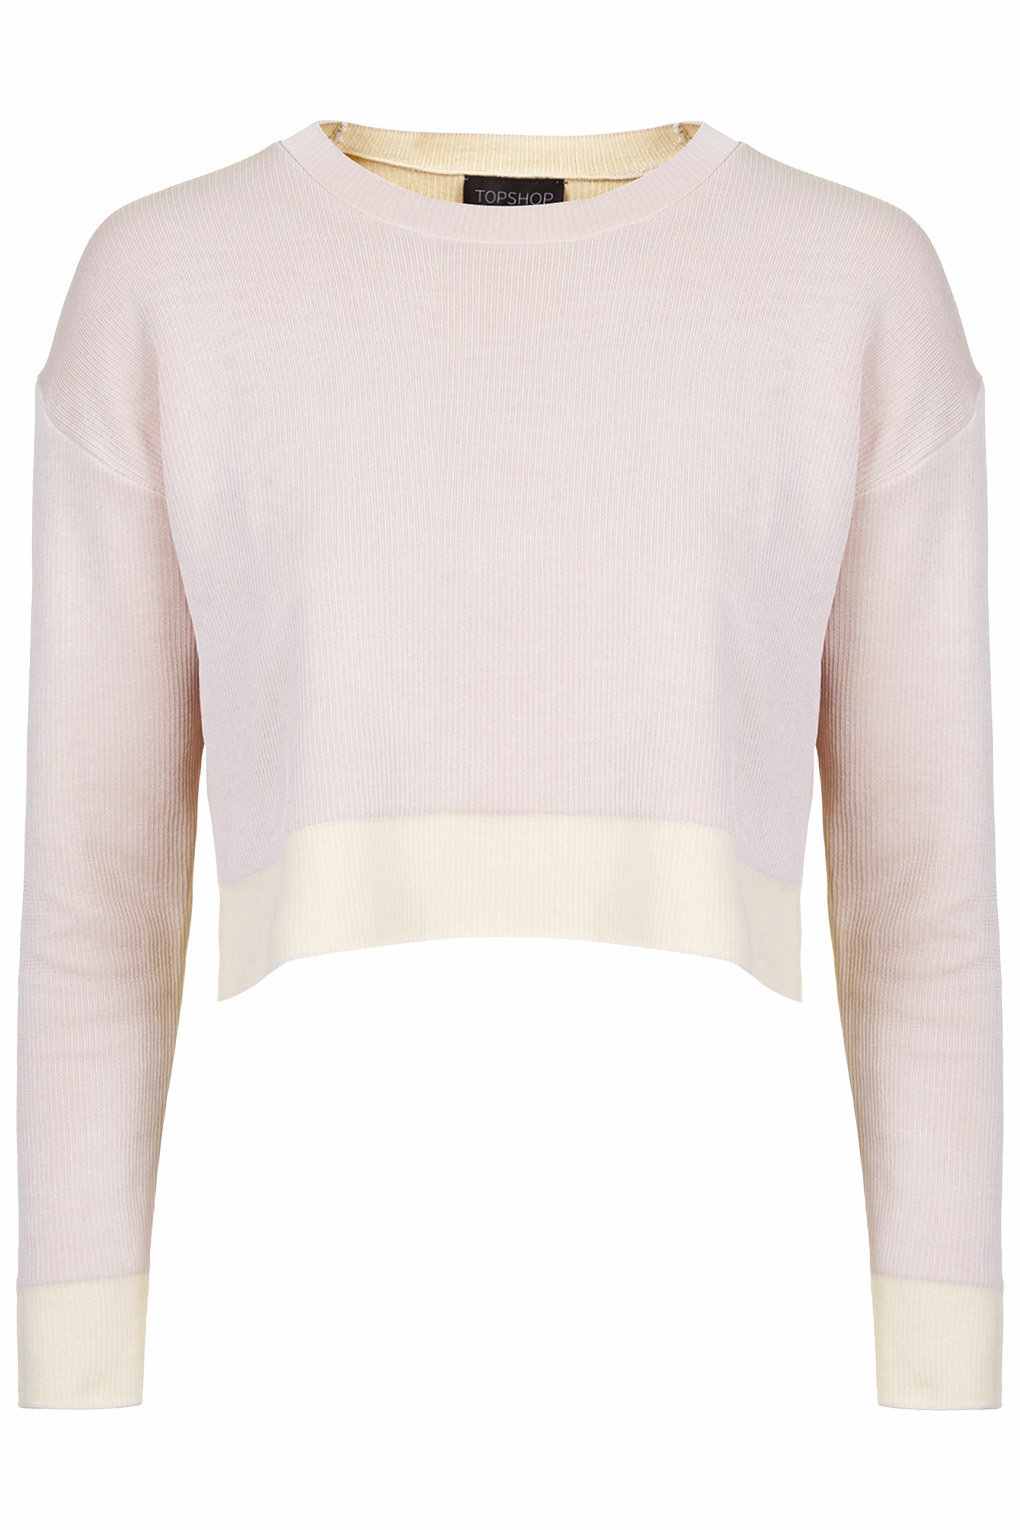 Topshop - Pull (50 €)